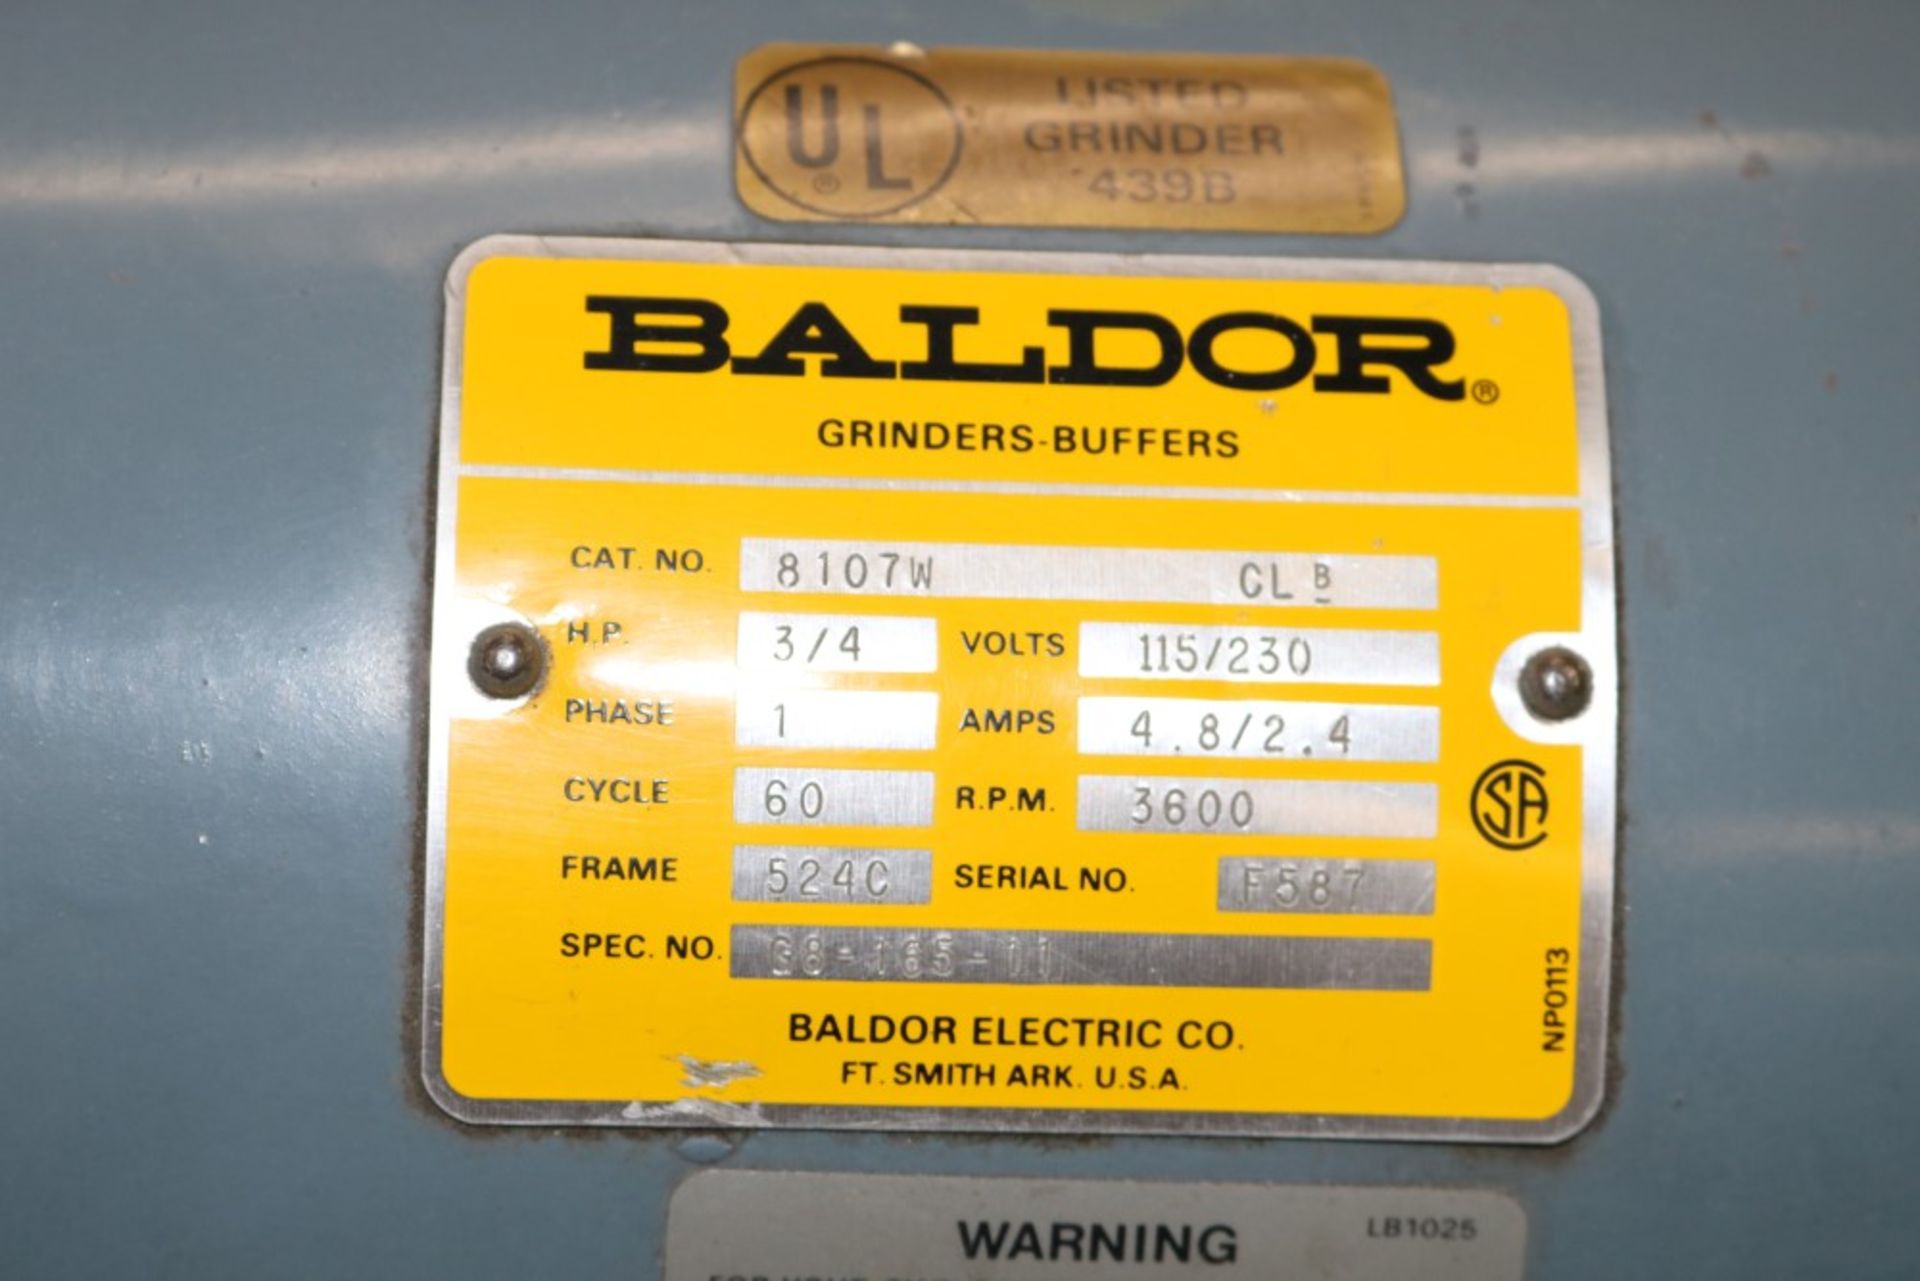 Baldor Grinder/Buffer 3/4 HP, 3600 RPM, with Grinding Wheels Attached - Image 2 of 5